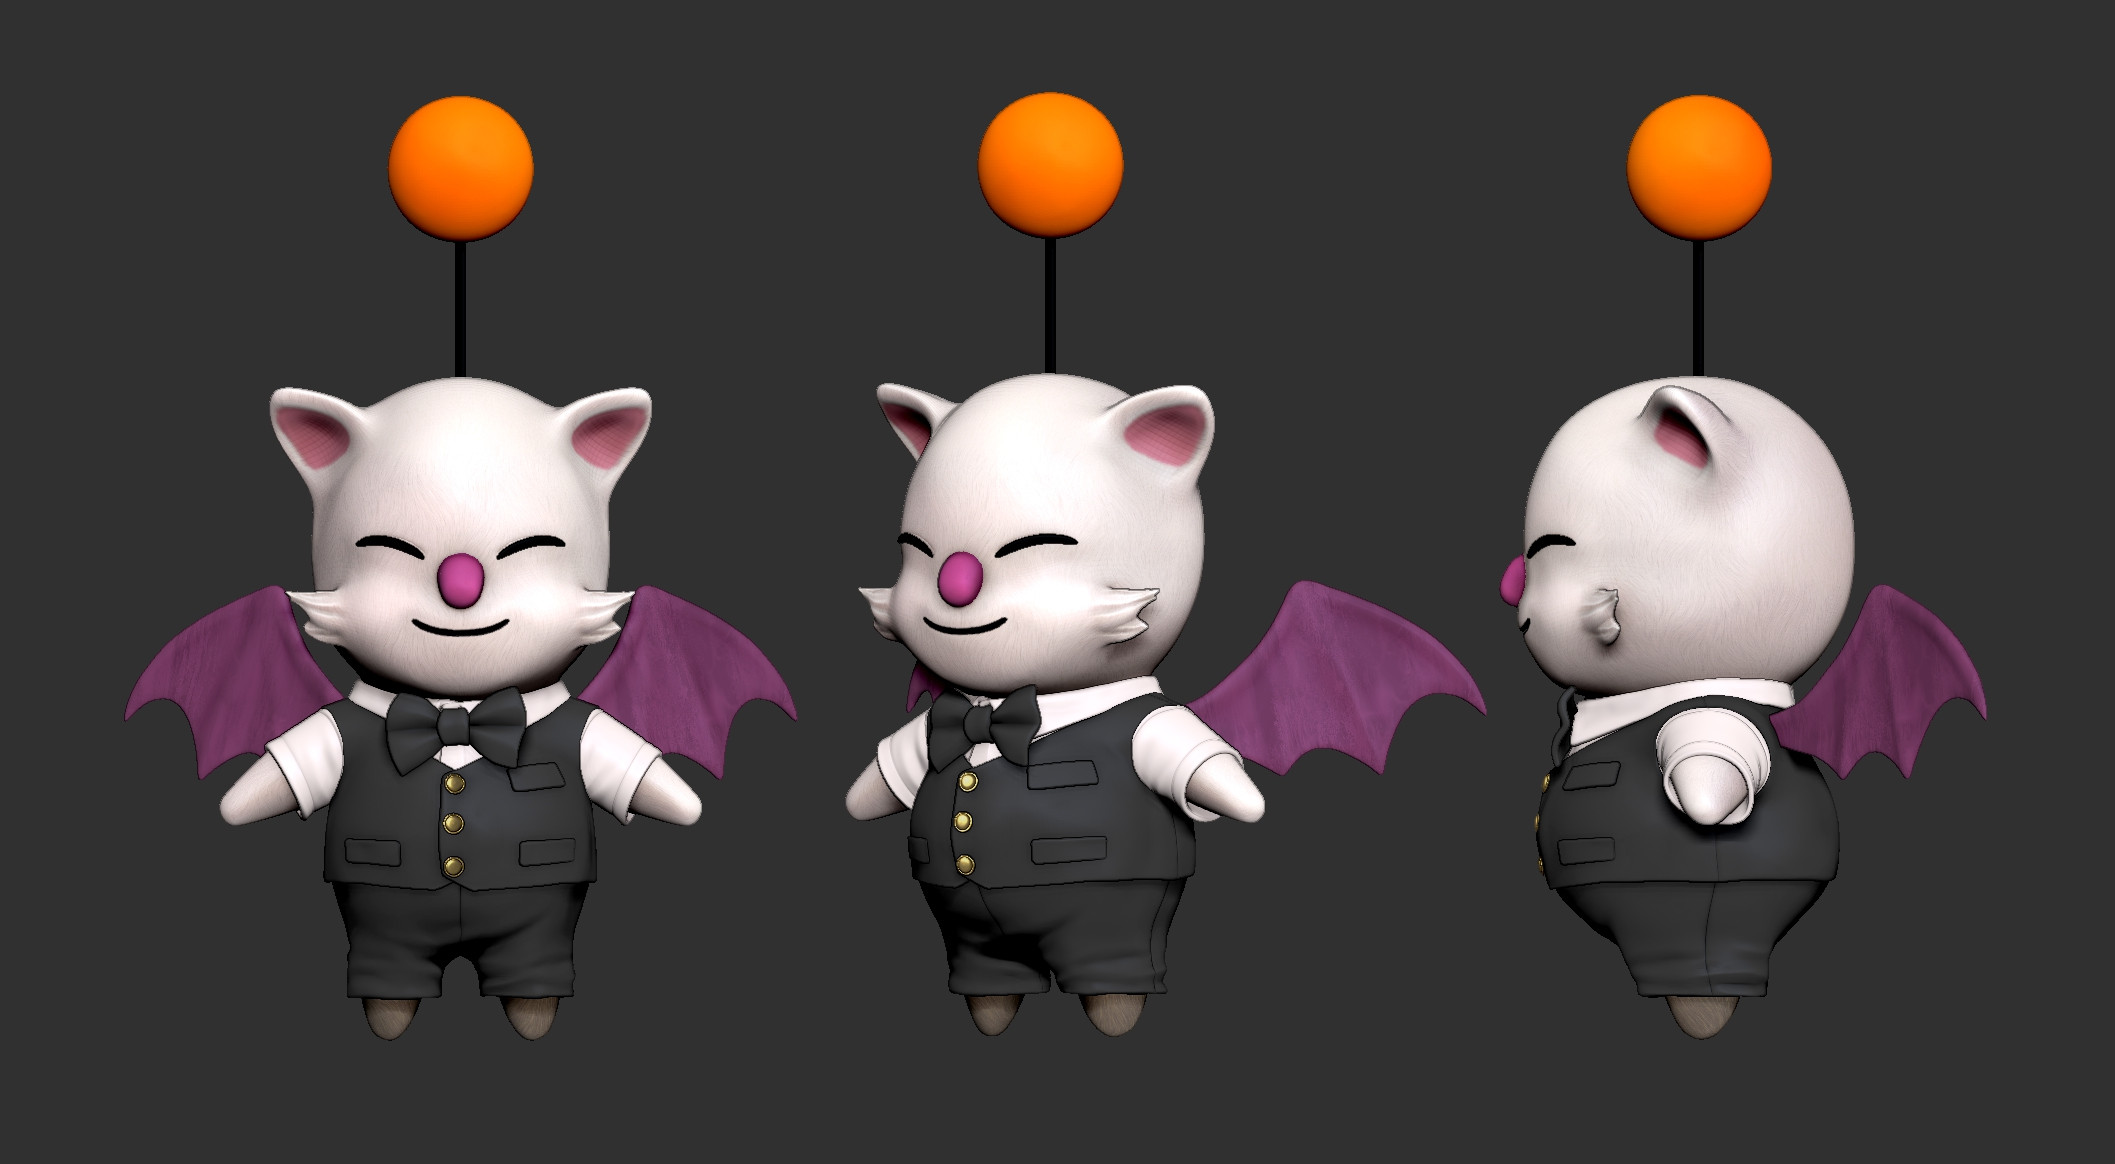 This was a costume variant that didn't get finished for the waiter moogle